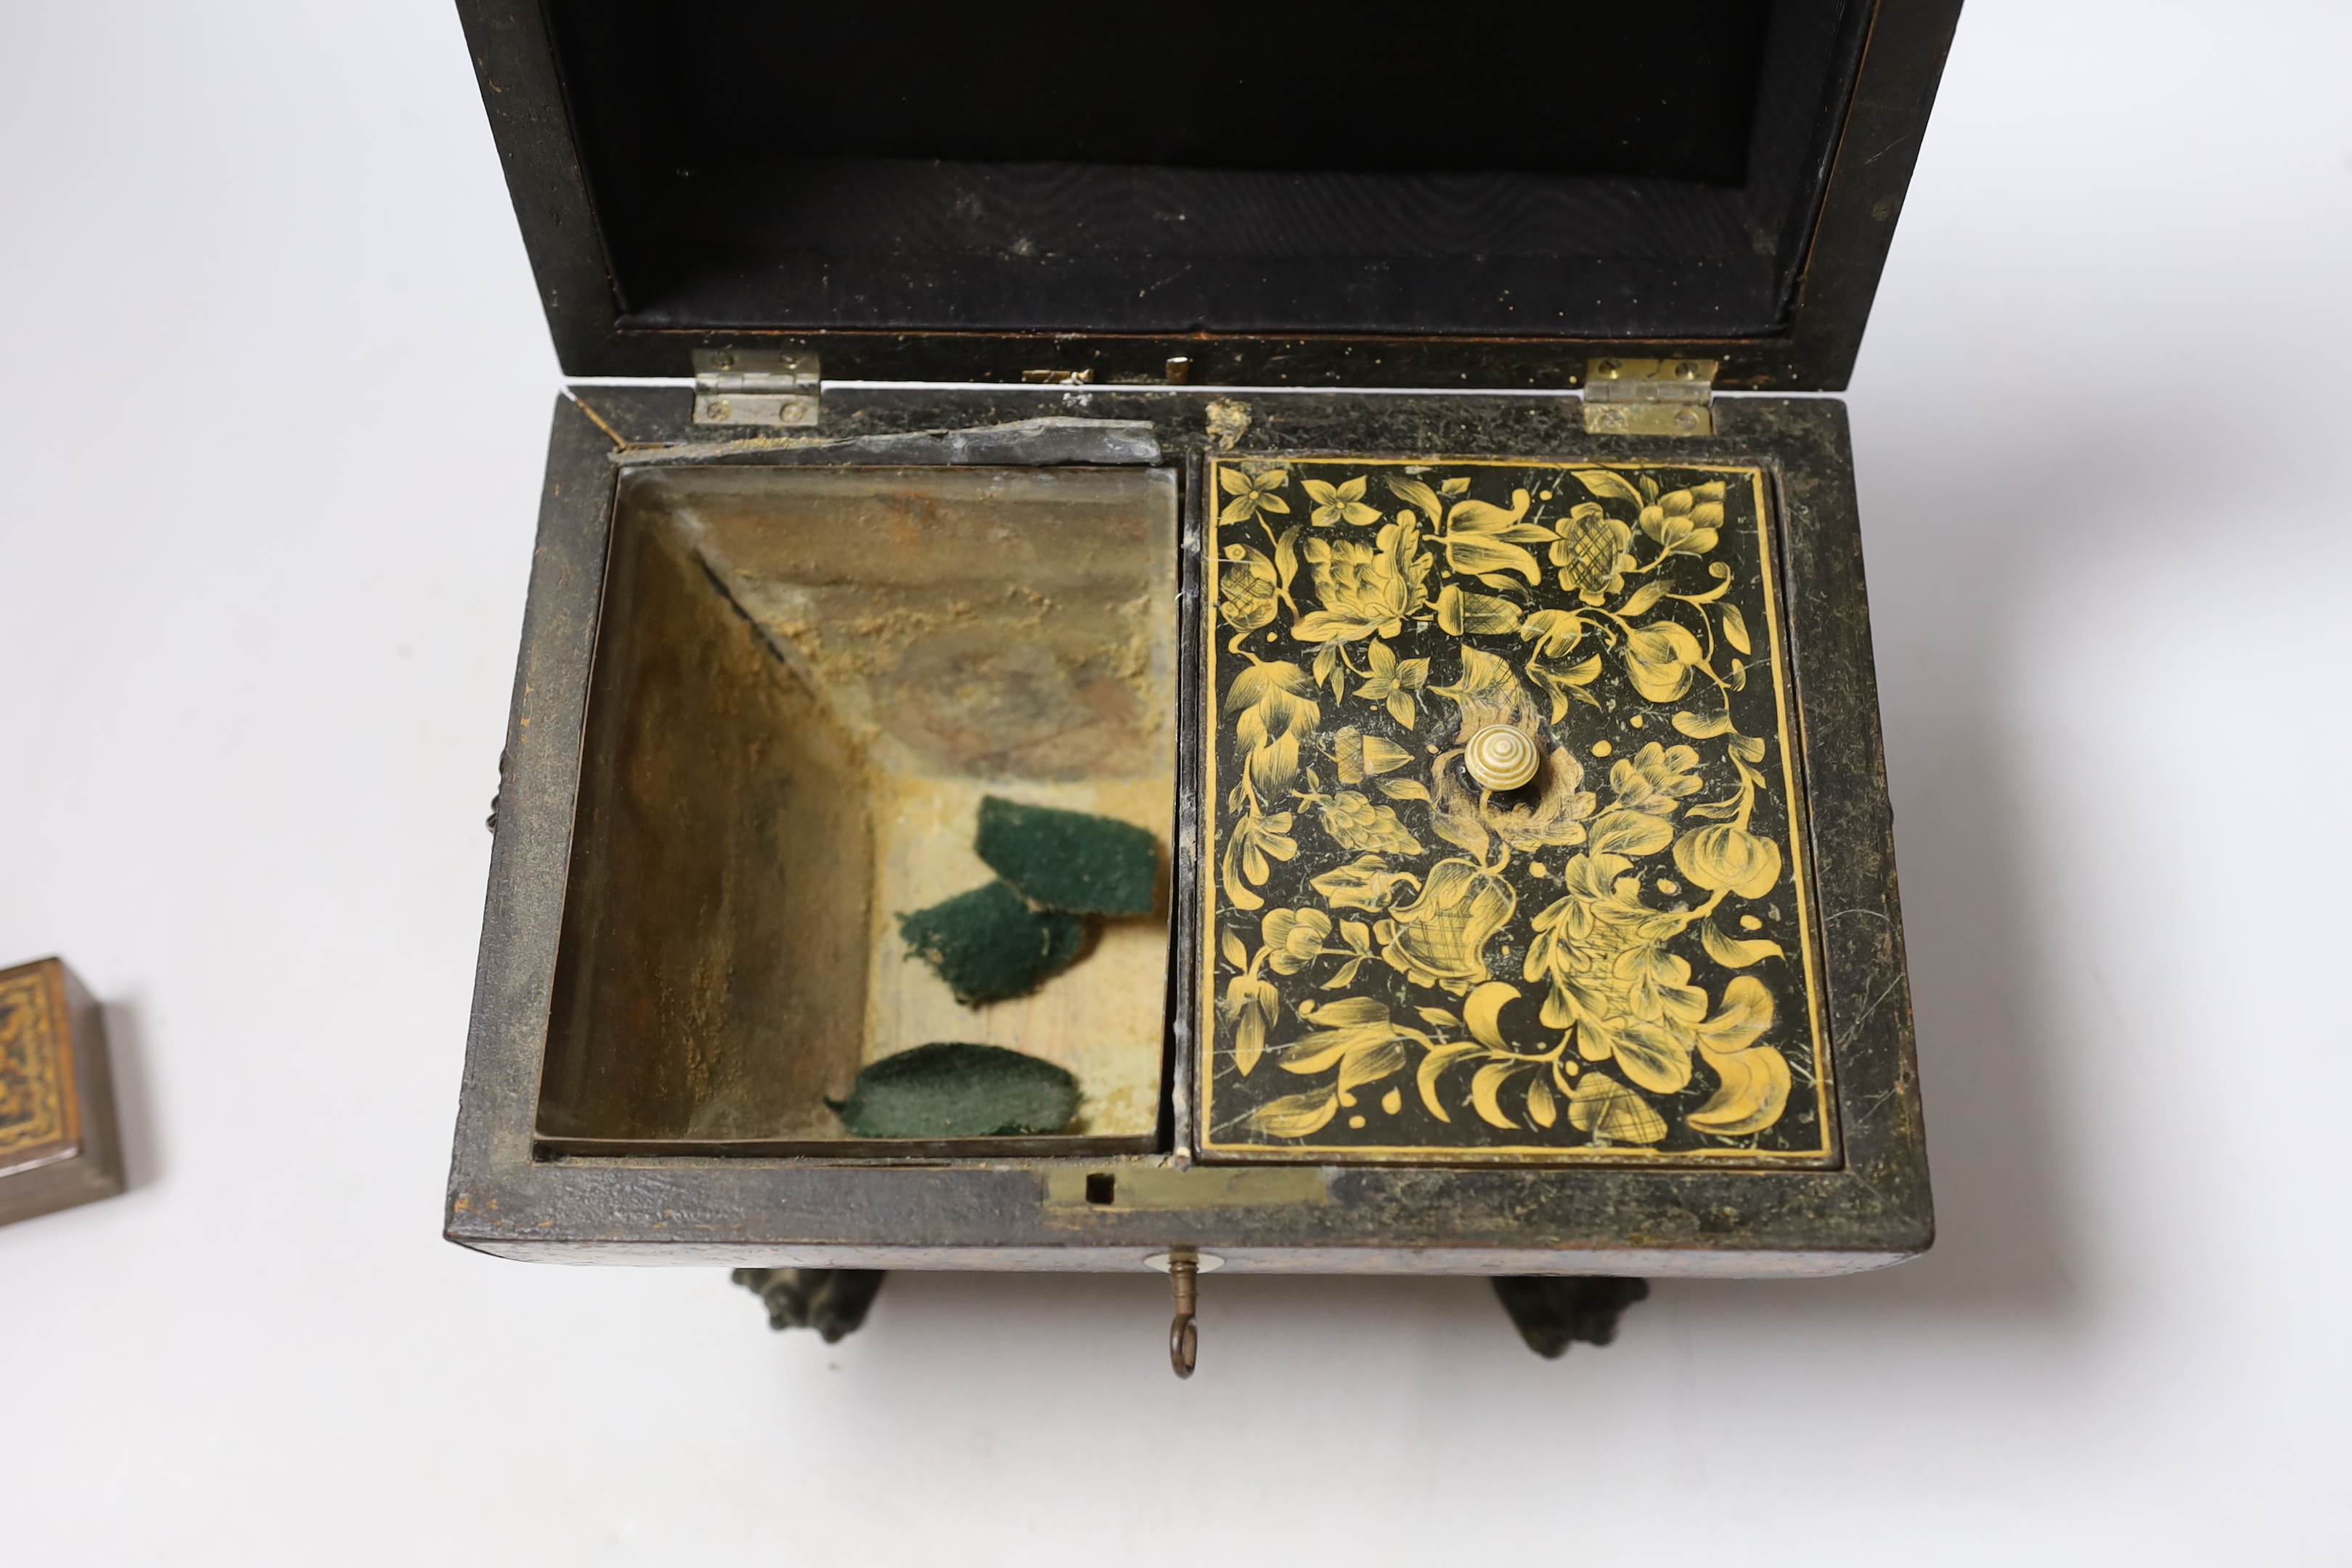 A Regency penwork tea caddy, the cover inset with an engraving of figures by a castle, 23.5 x 16 x 16cm and two small Tunbridge ware boxes